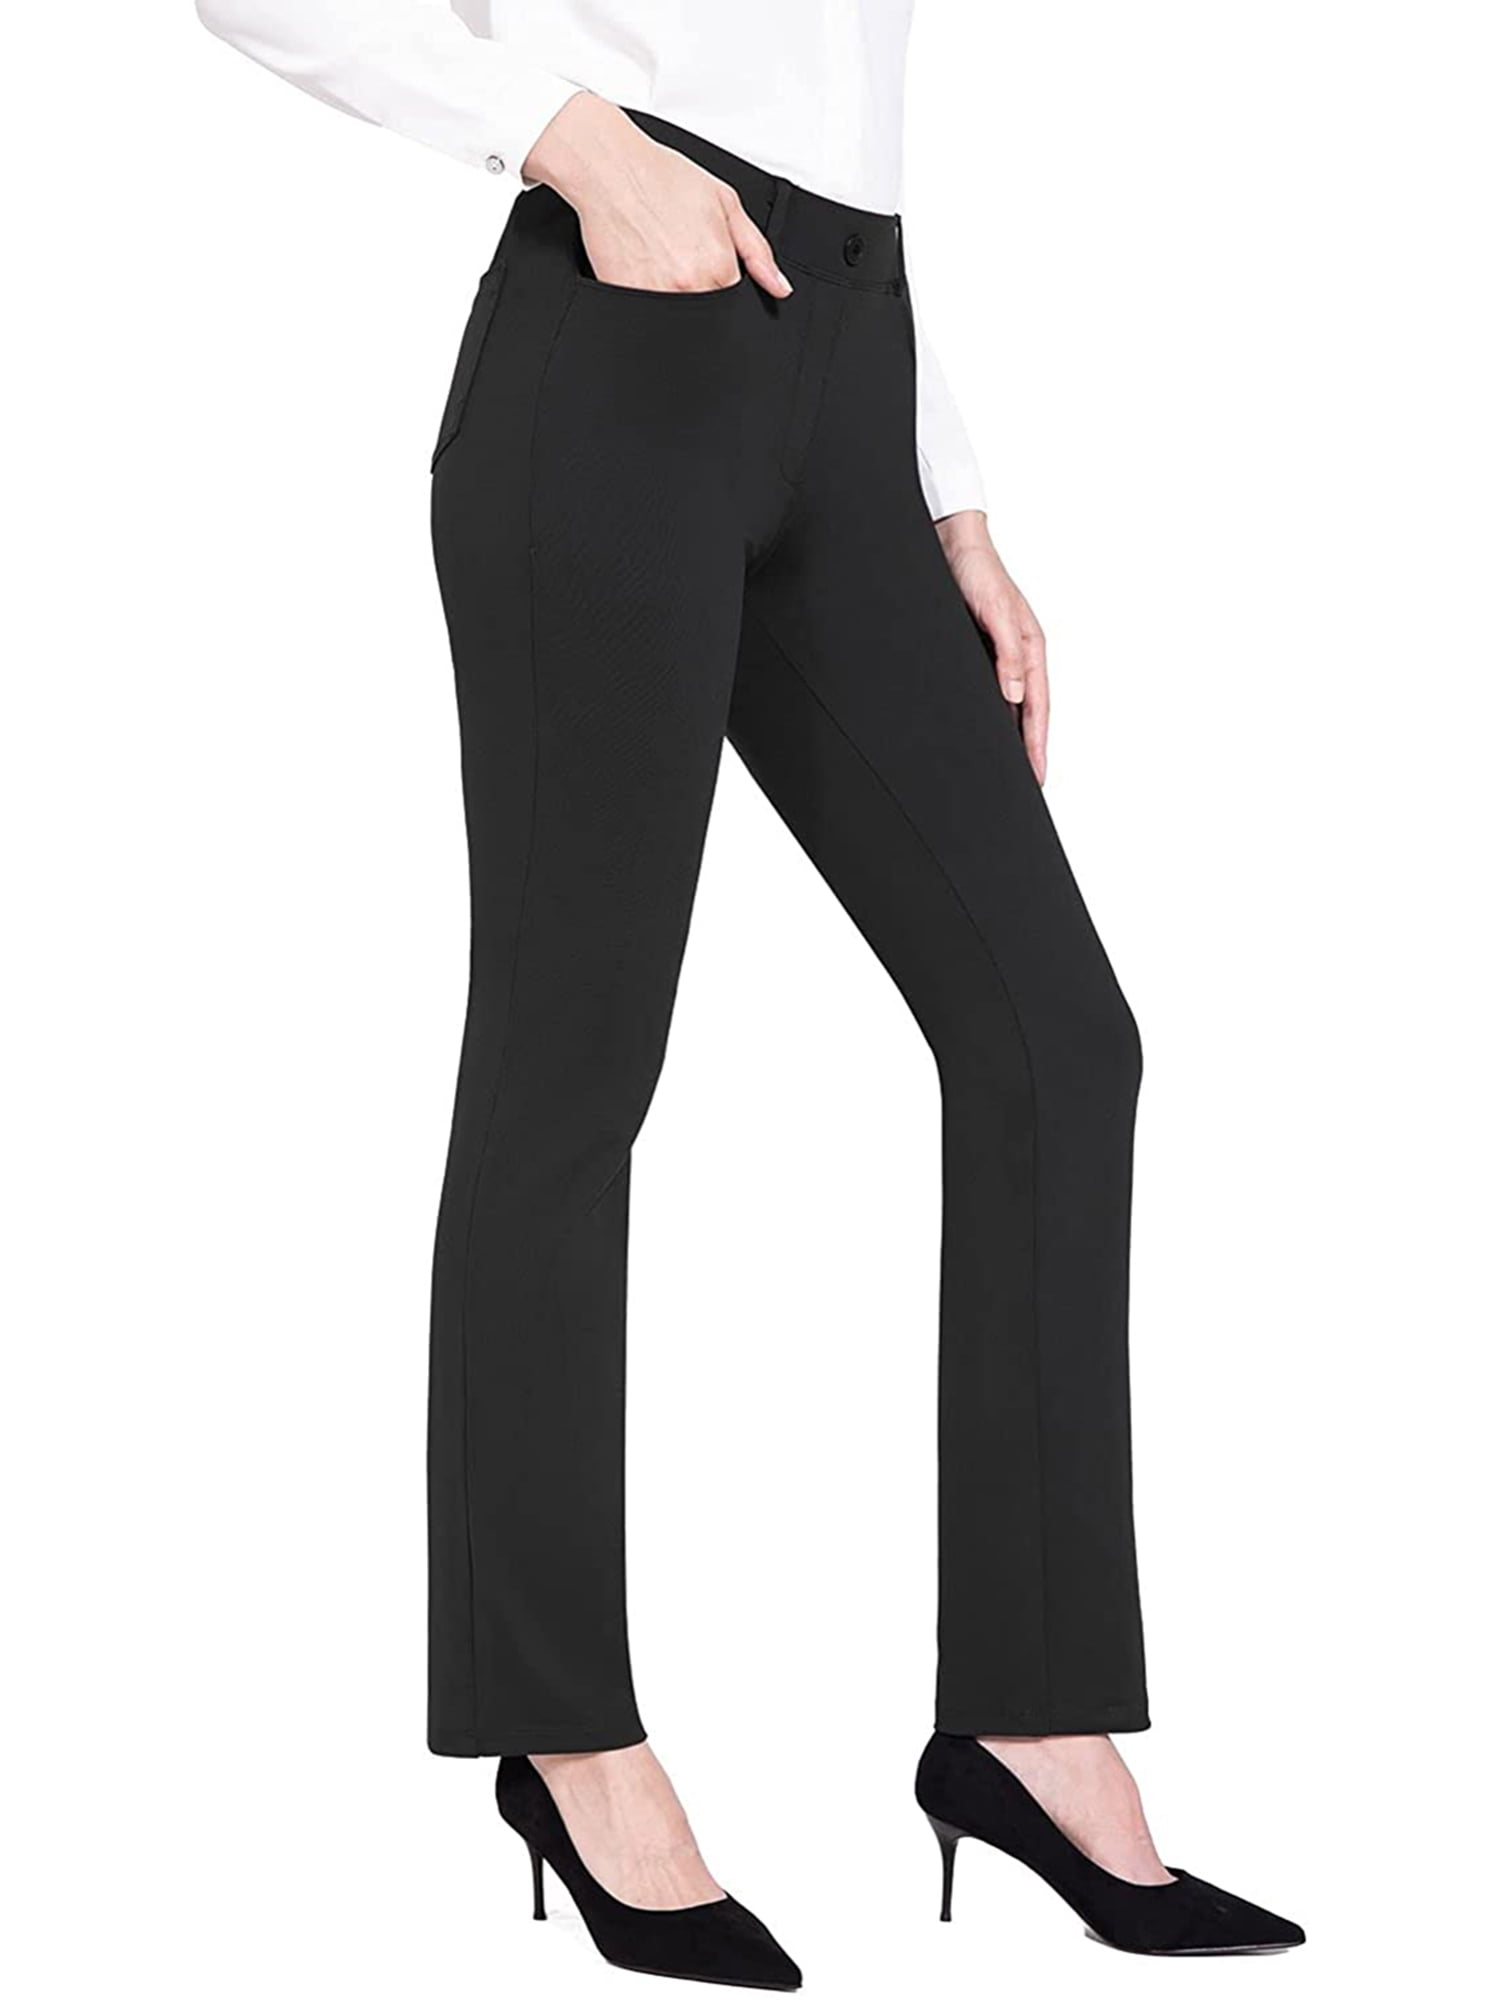 BALEAF Women's Work Leggings Skinny Yoga Dress Pants Stretchy Business Casual with Pockets Office Ponte 